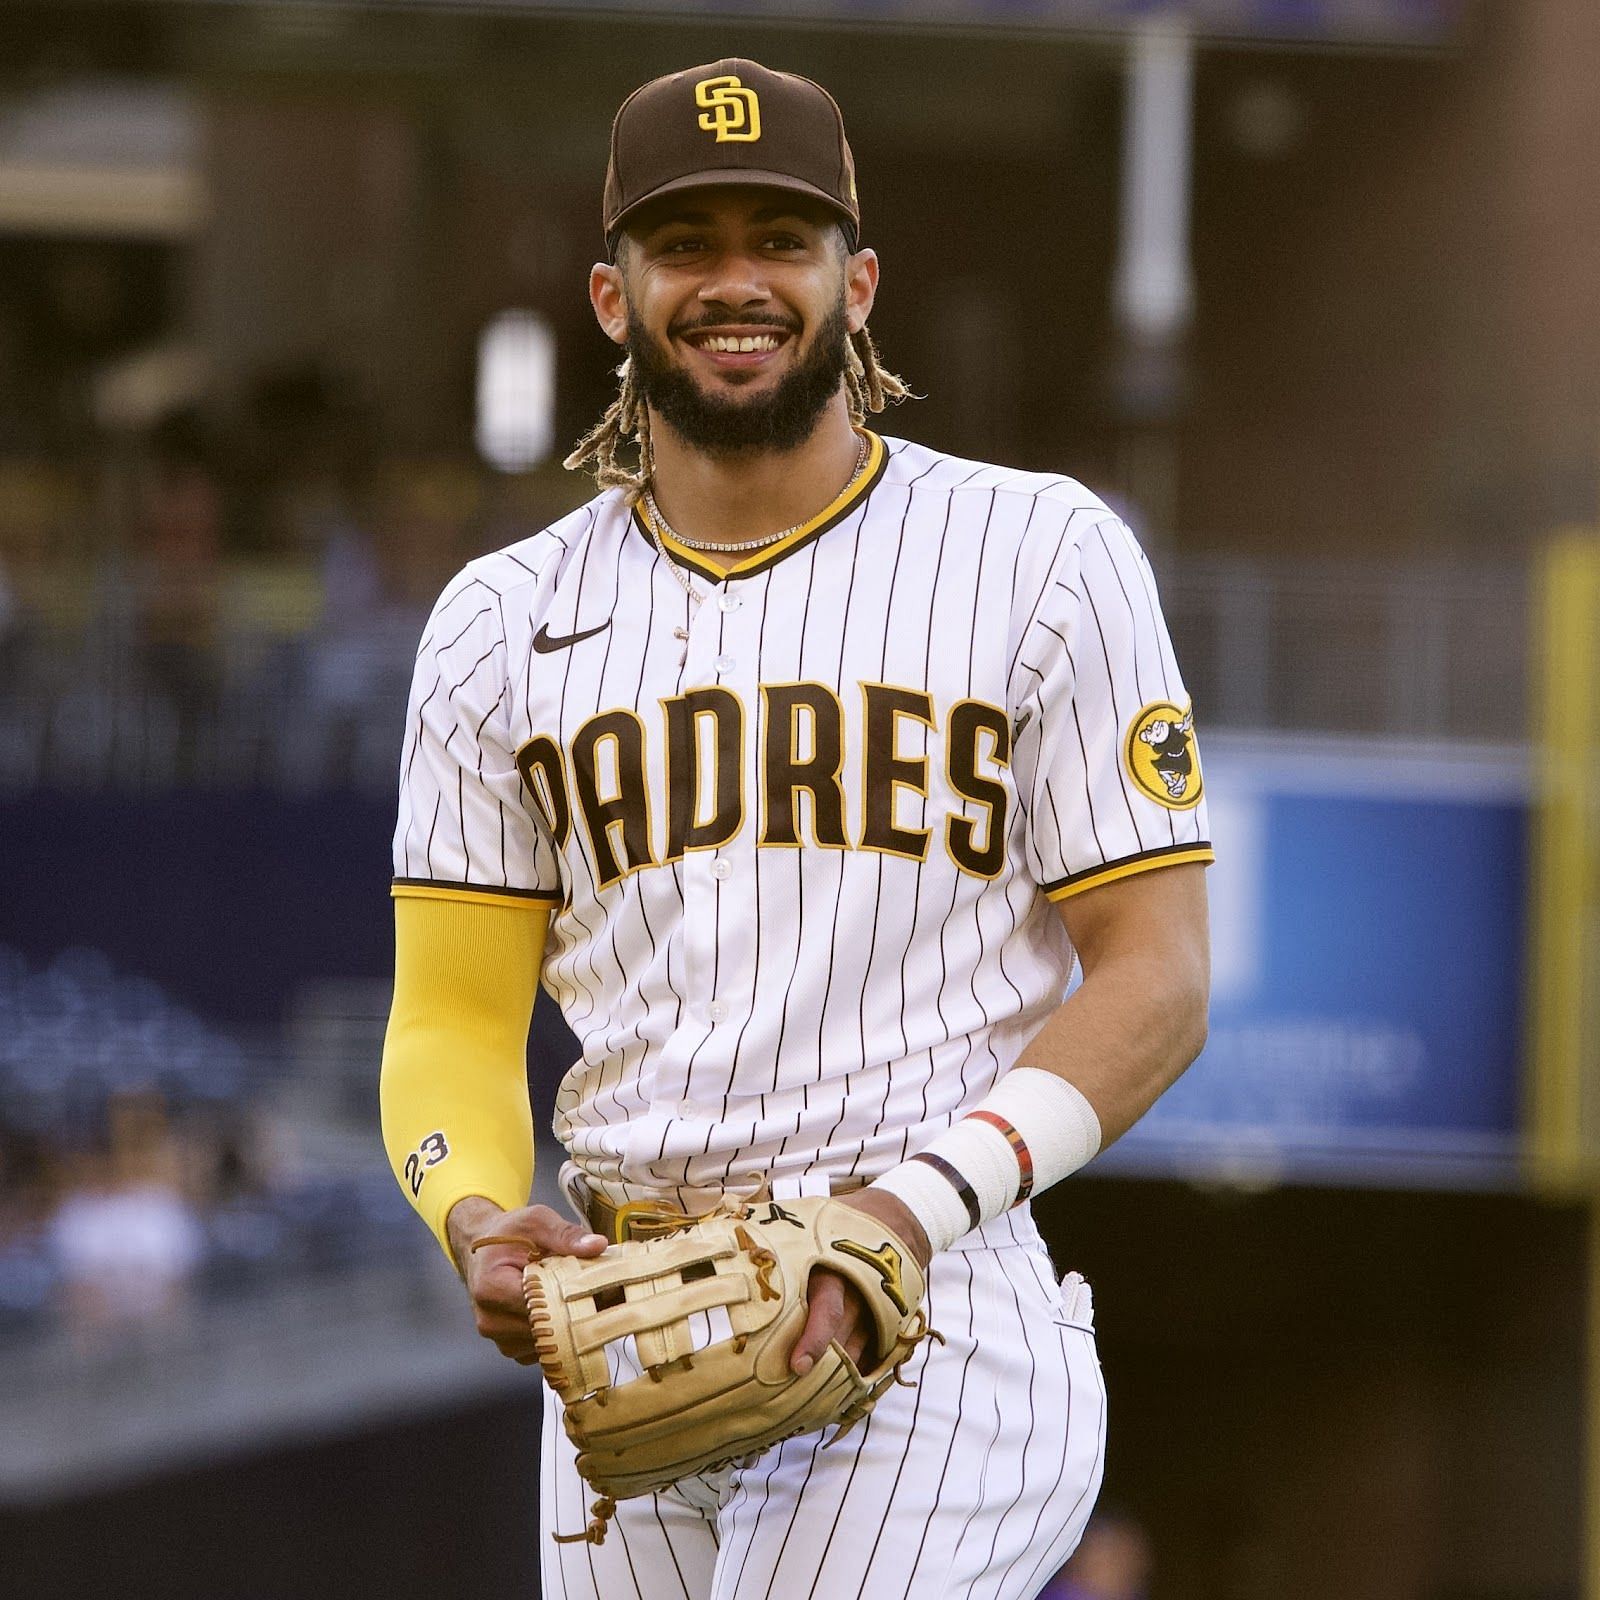 Padres lock up Fernando Tatis Jr. to record 14-year, $340 million contract